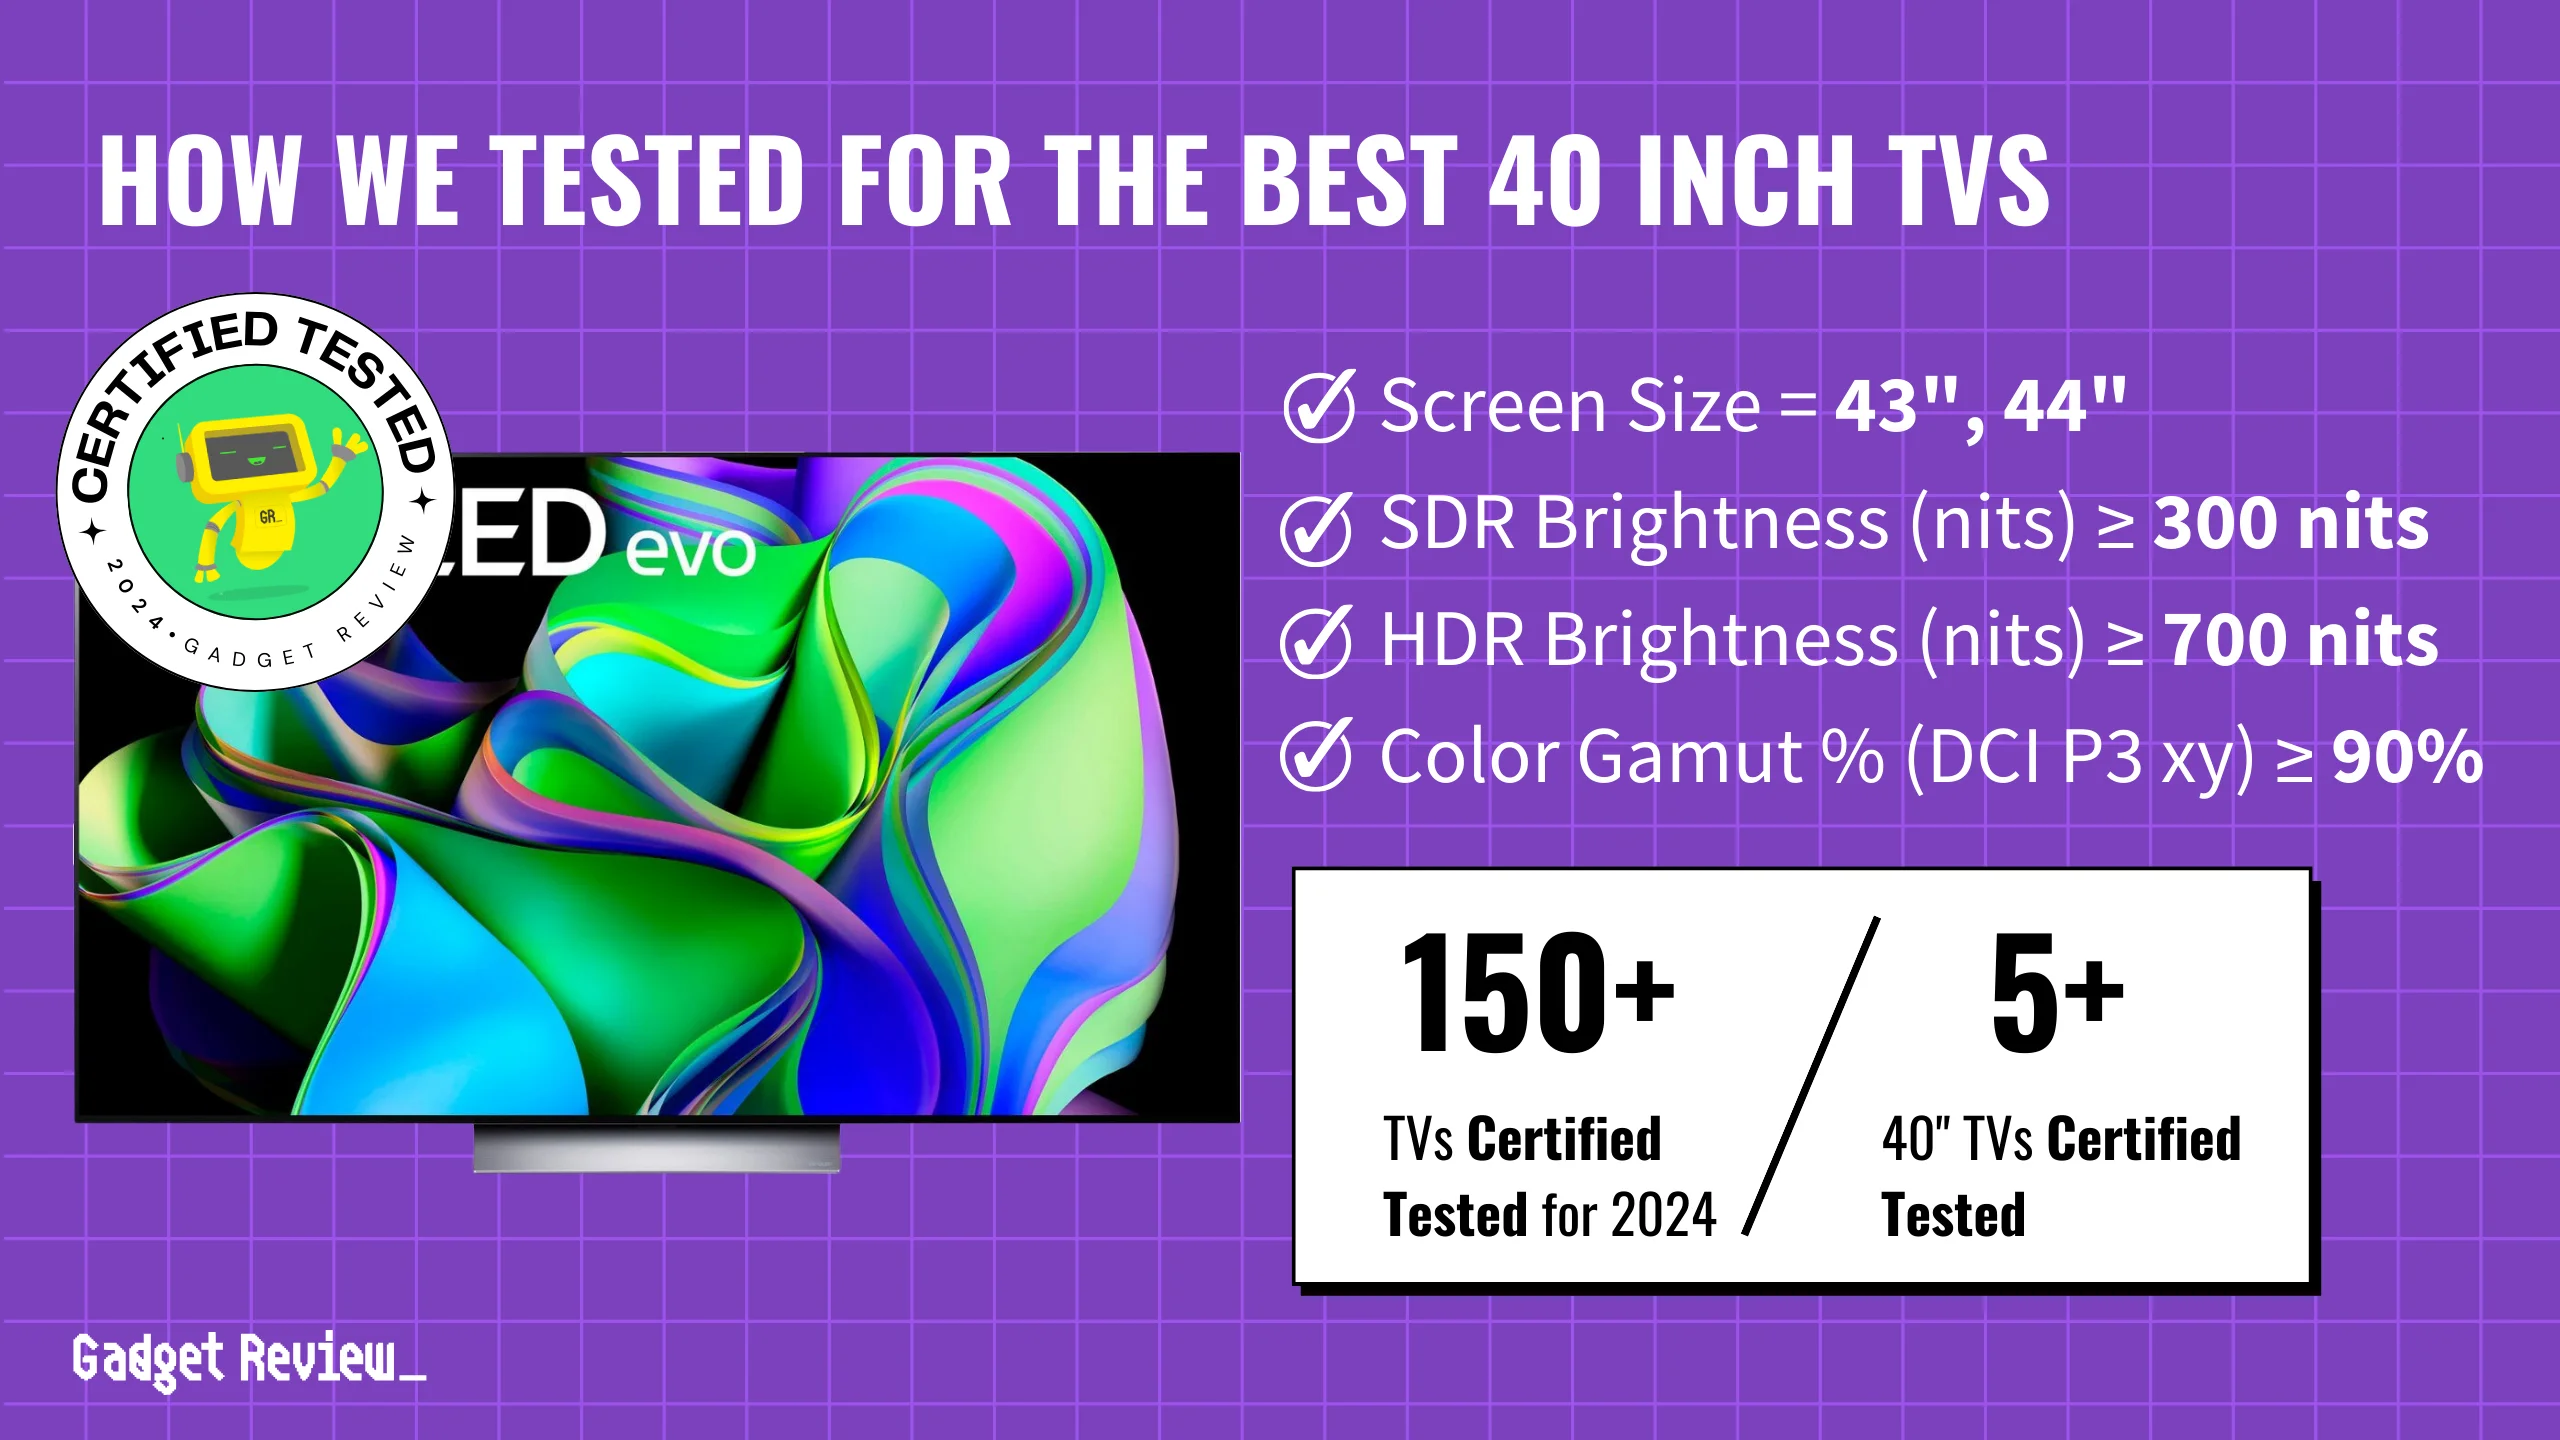 We Ranked The 4 Best 40 Inch TVs